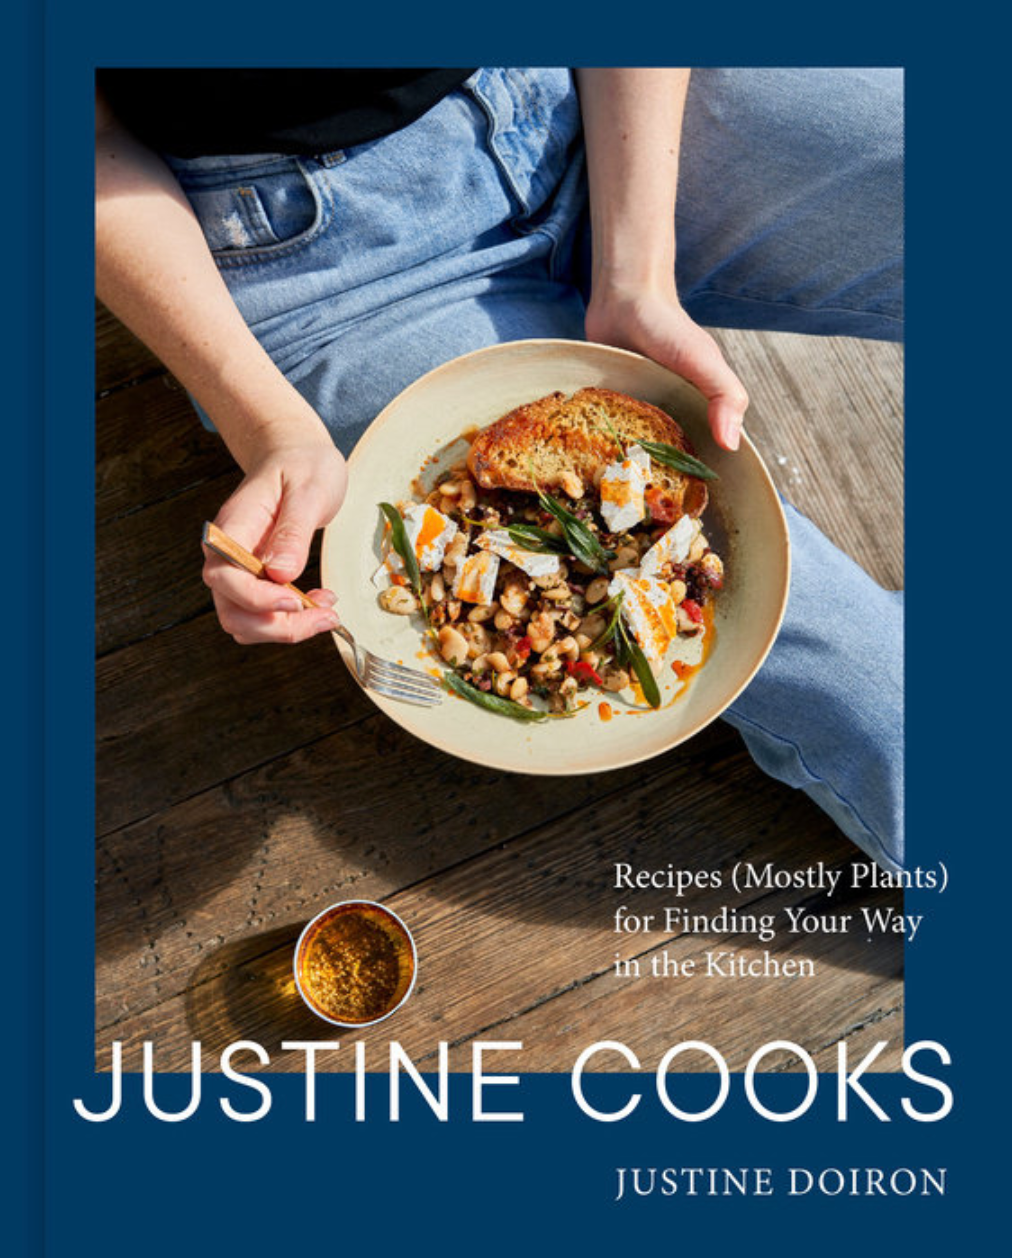 *Pre-order* Justine Cooks: Recipes (Mostly Plants) for Finding Your Way in the Kitchen (Justine Dorion)